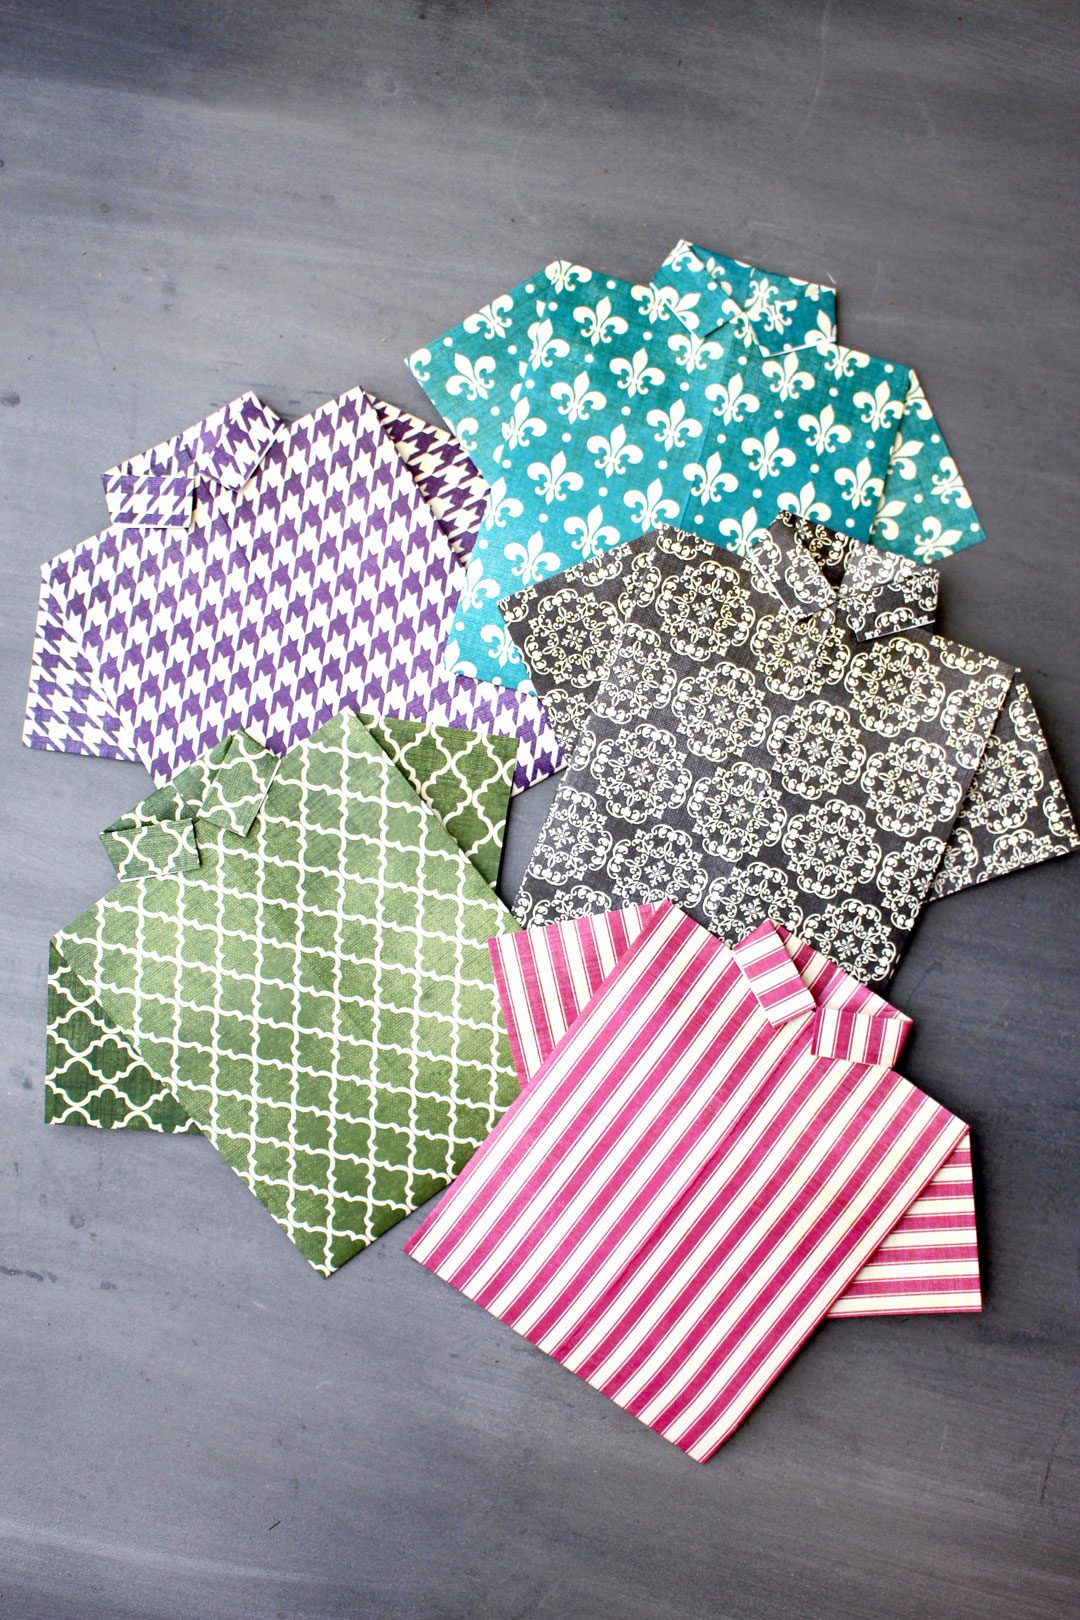 Pink, green, teal, black, and purple patterned pieces of scrapbook paper folded into origami shirts.